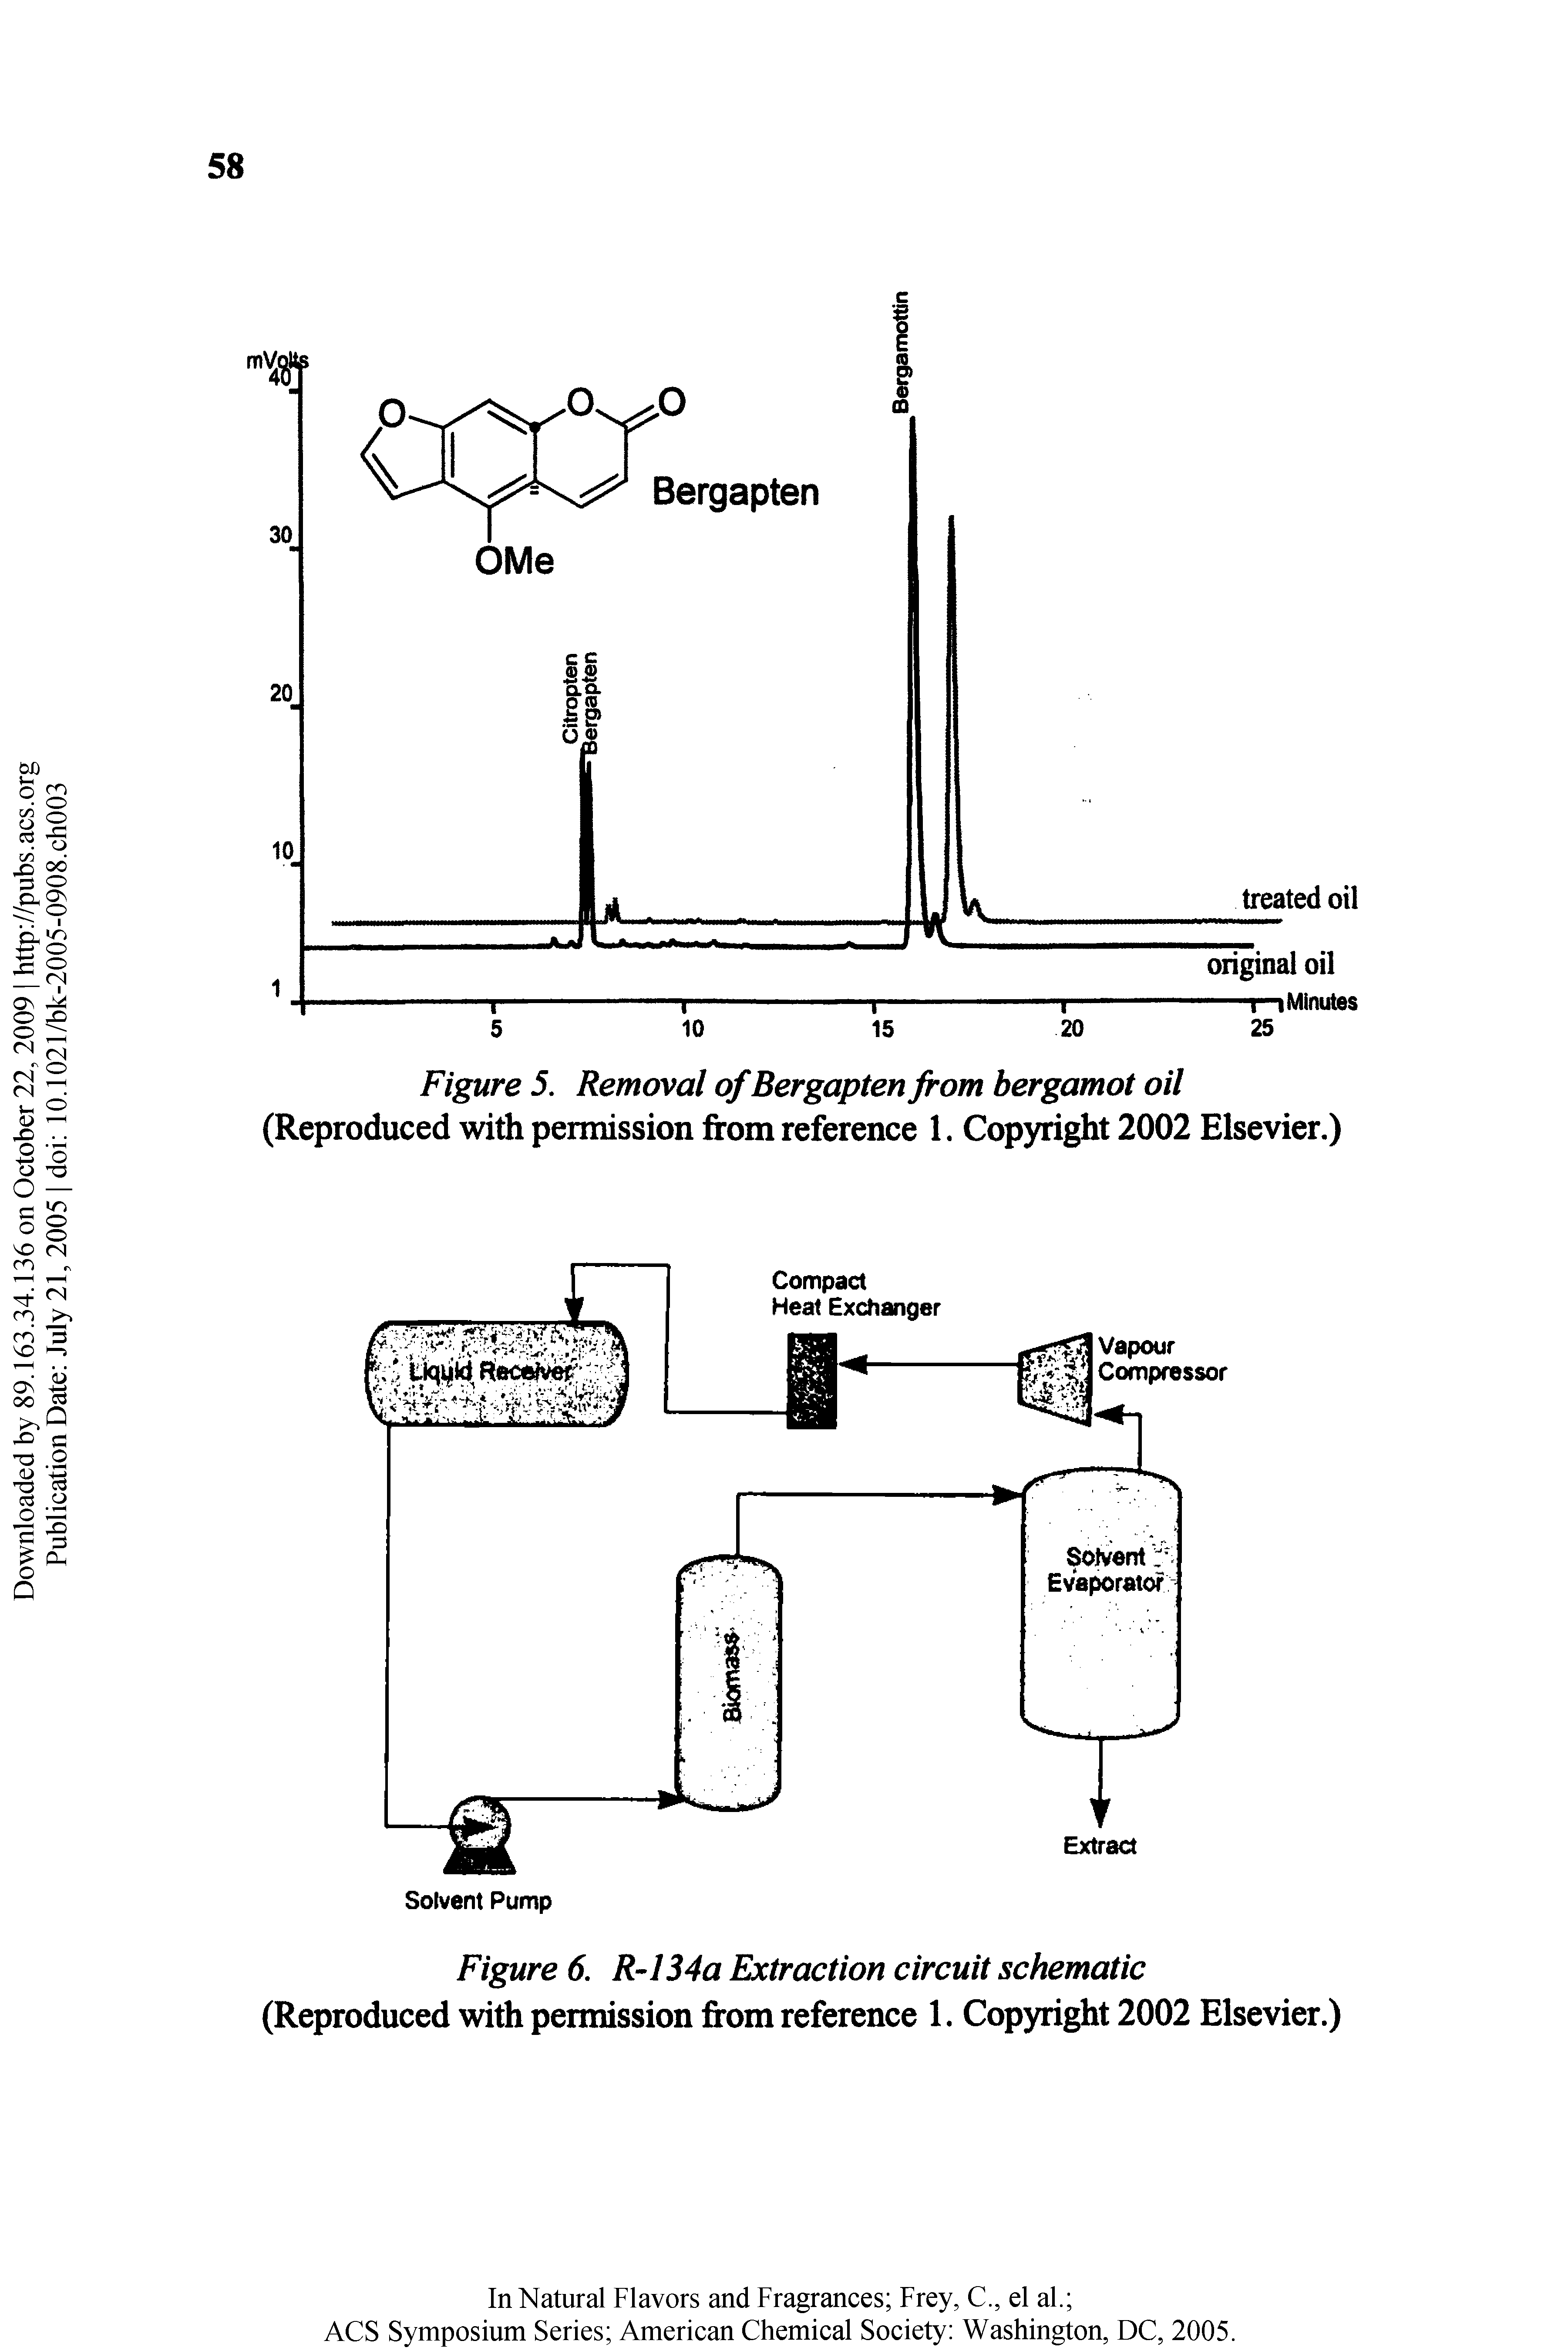 Figure 5. Removal of Bergapten from bergamot oil (Reproduced with permission from reference 1. Copyright 2002 Elsevier.)...